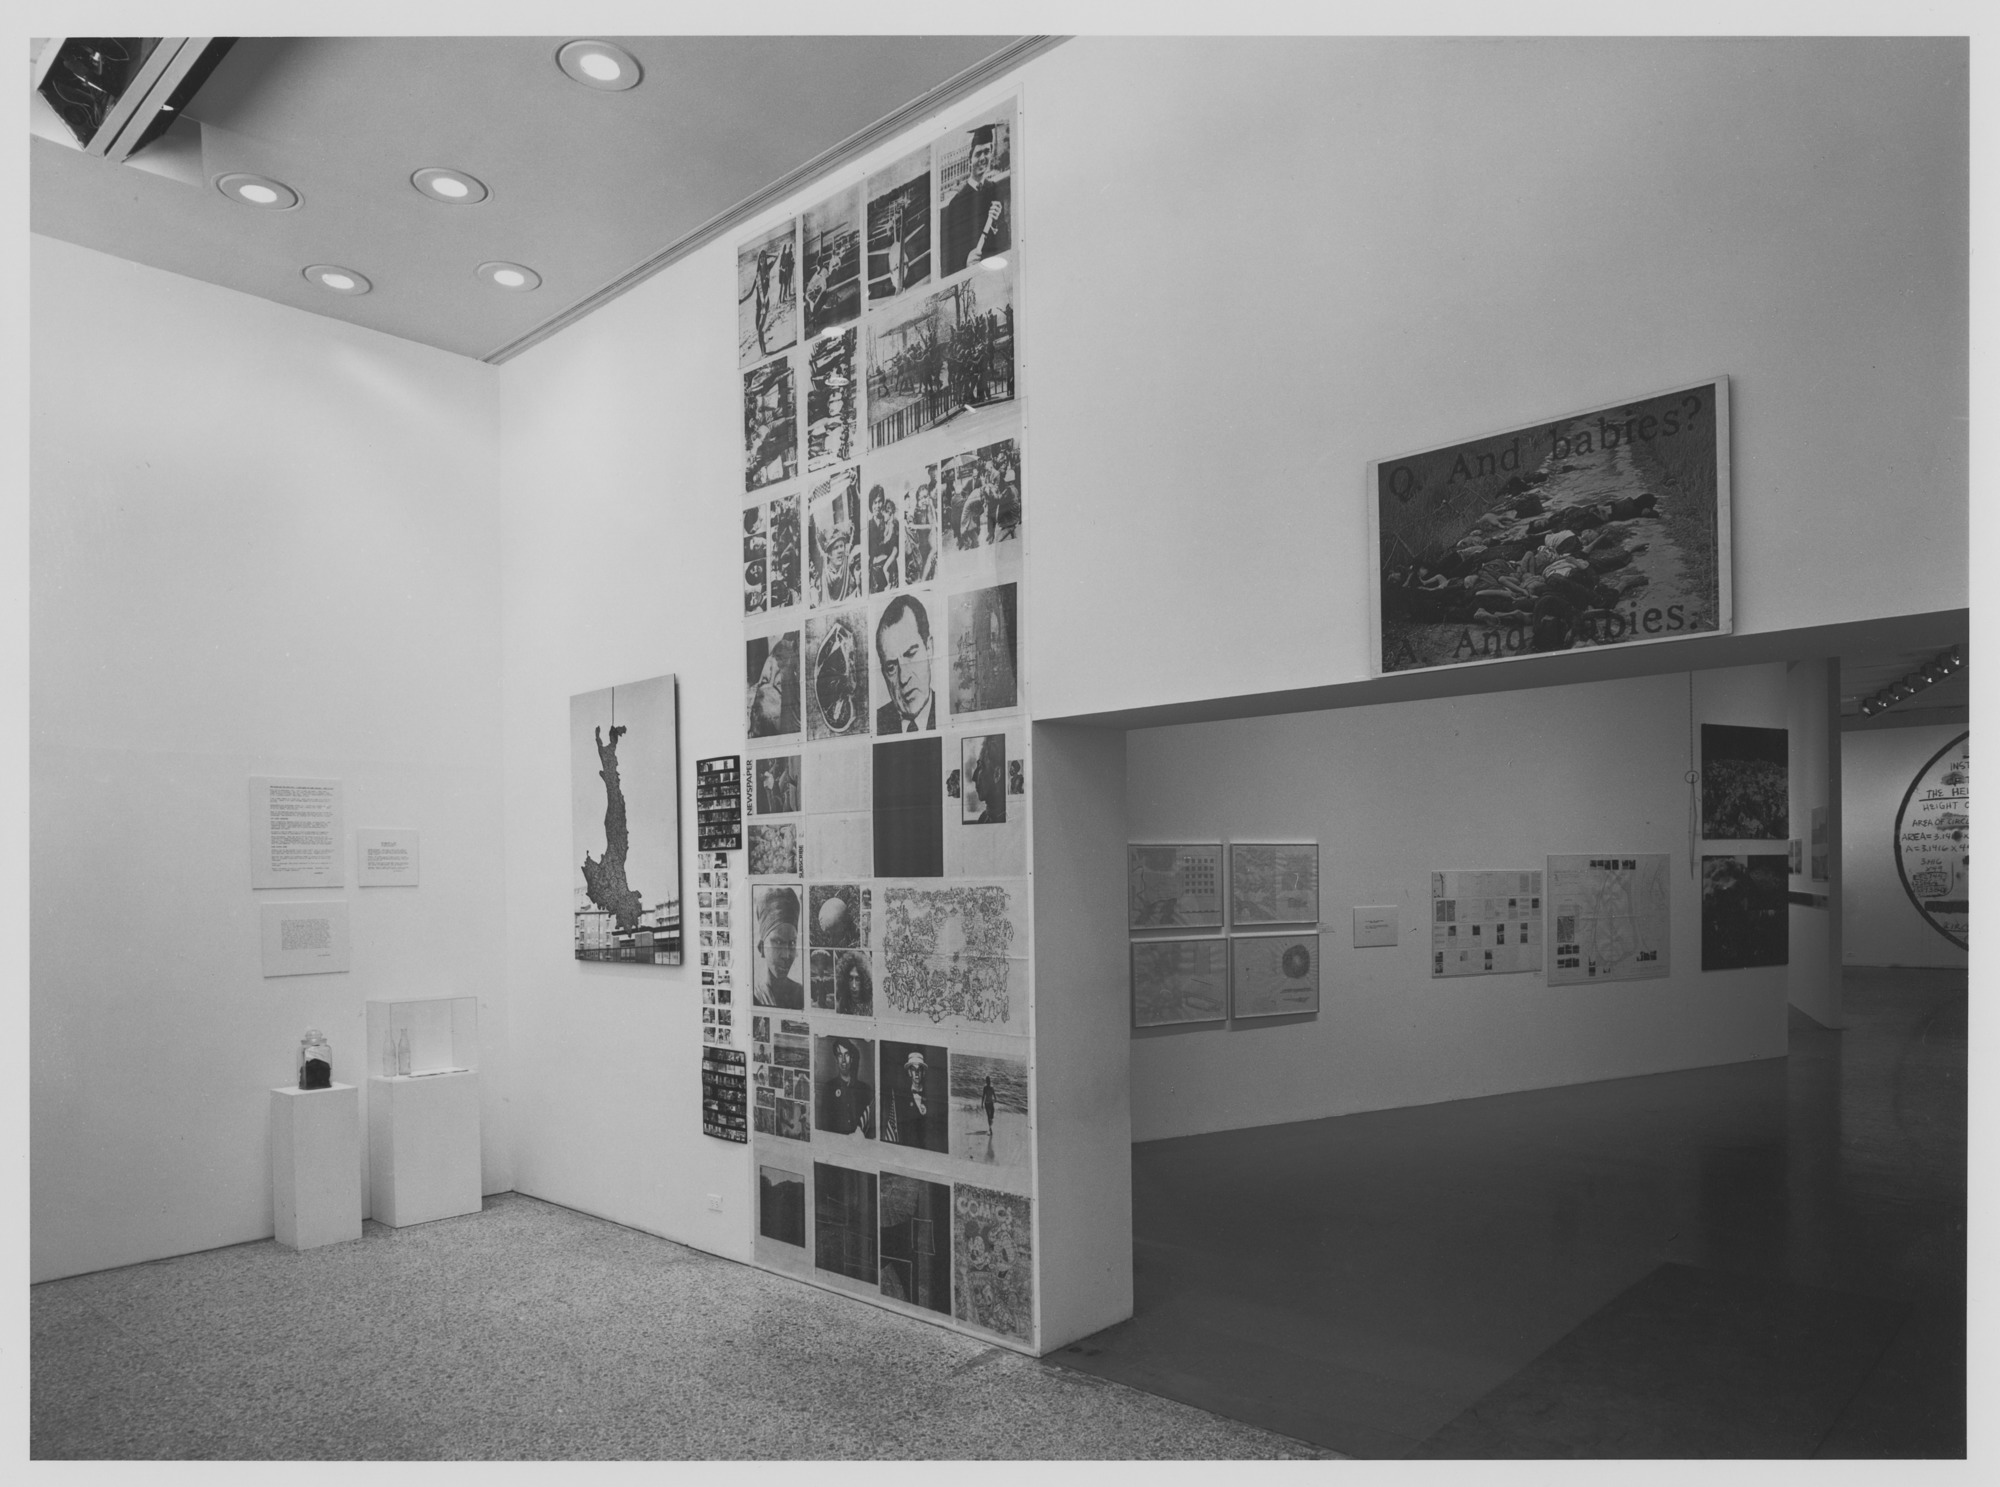 fig. 9 – Information,exhibition view, 07/02 – 09/20/1970. Archive photo. The Museum of Modern Art, Archives, New York. Photography by James Mathews.